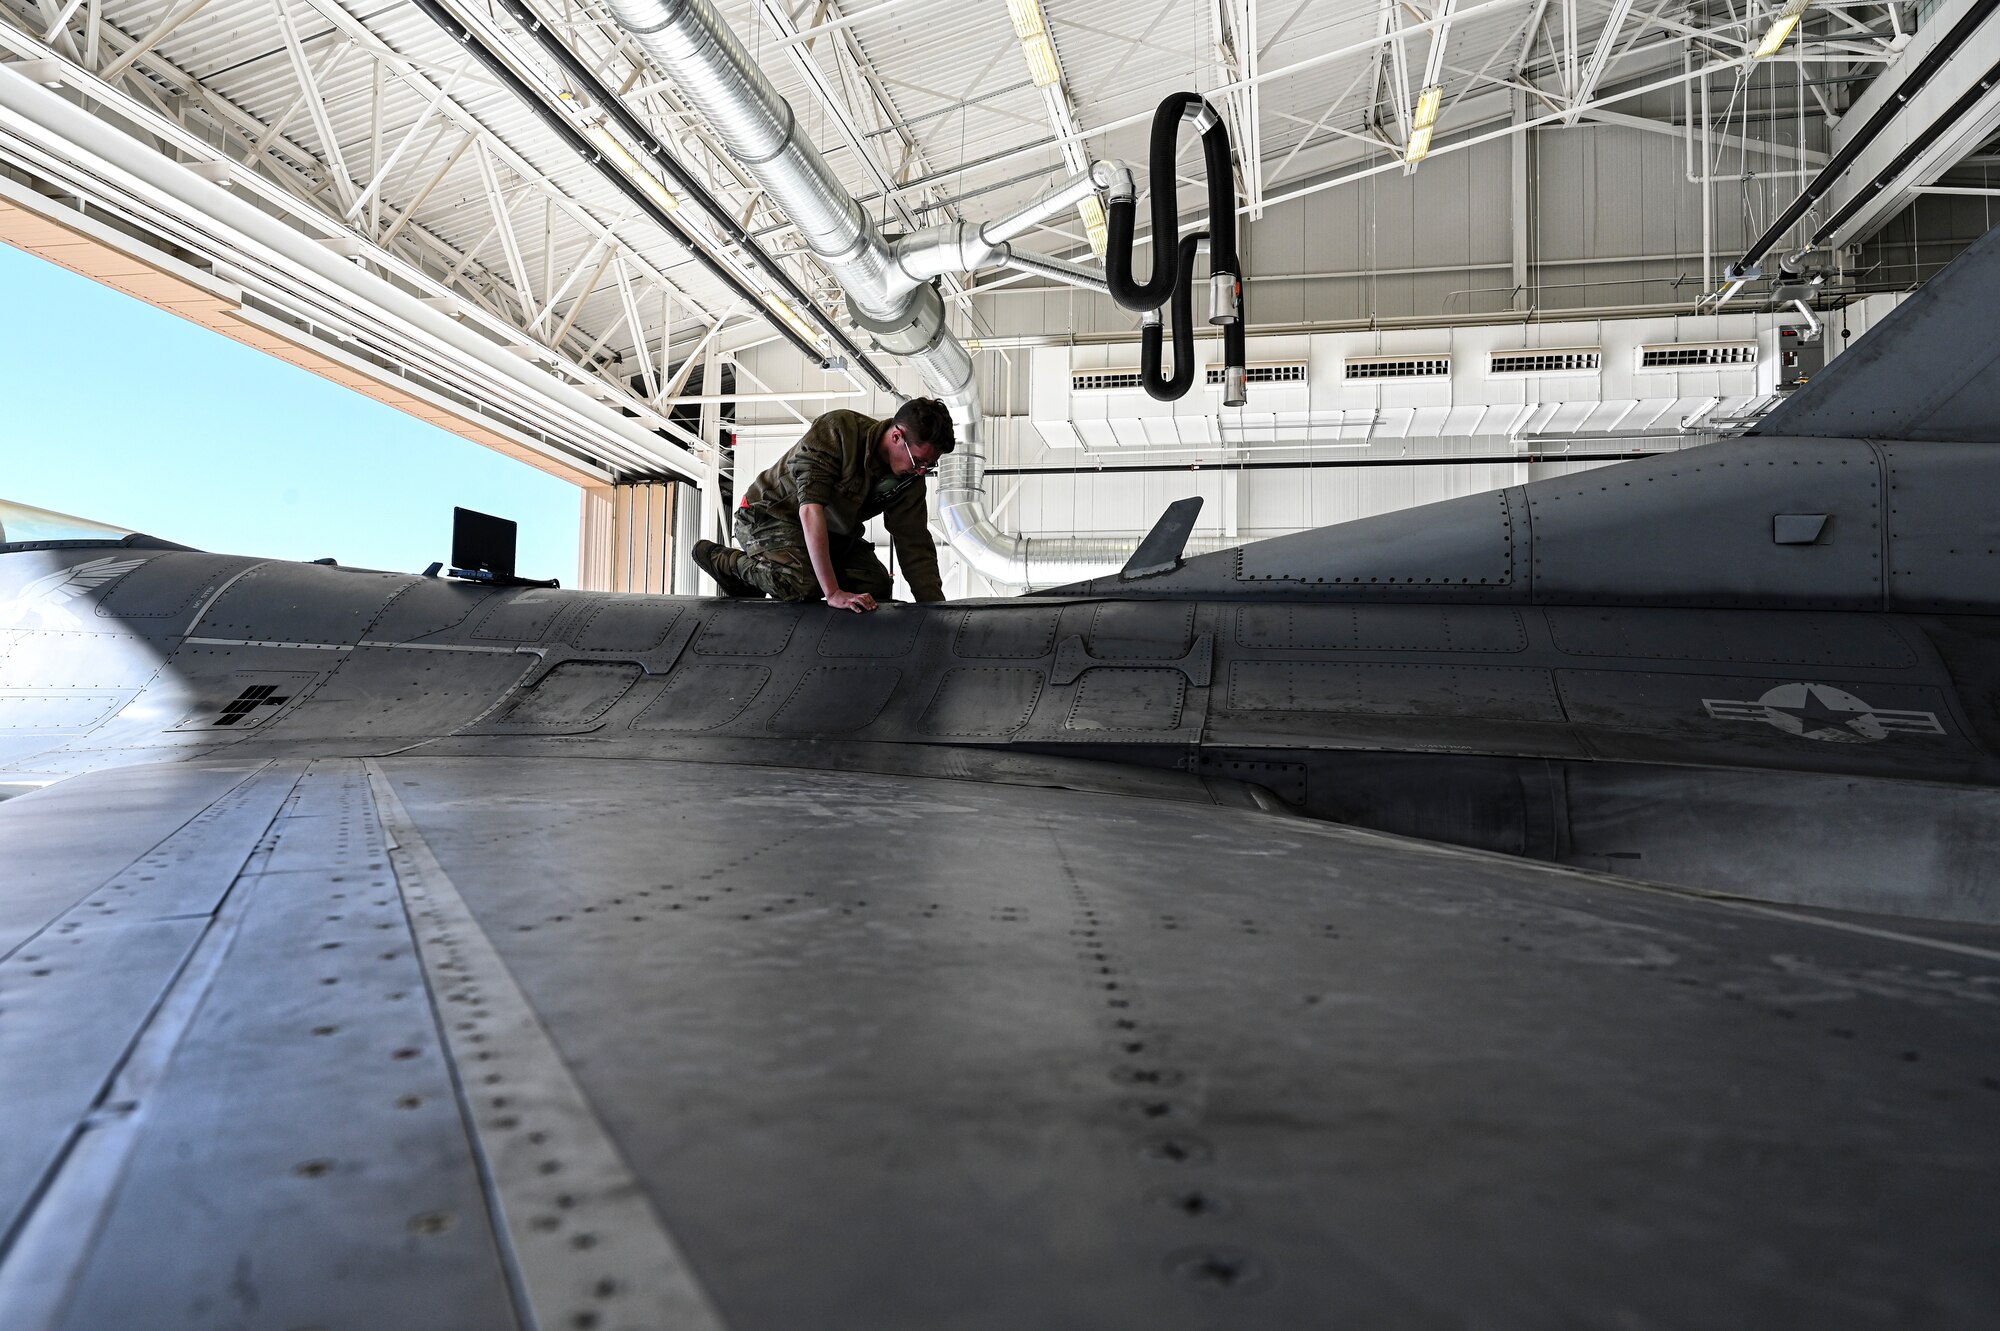 U.S. Air Force Senior Airman William Hunter, 49th Component Maintenance Squadron fuels journeyman, checks a valve on top of an F-16 Viper at Holloman Air Force Base, New Mexico, Feb. 8, 2023. The 49th CMS fuels shop is in charge of maintaining and supplying anything fuel-related to all F-16 Vipers on base. (U.S. Air Force photo by Airman 1st Class Isaiah Pedrazzini)